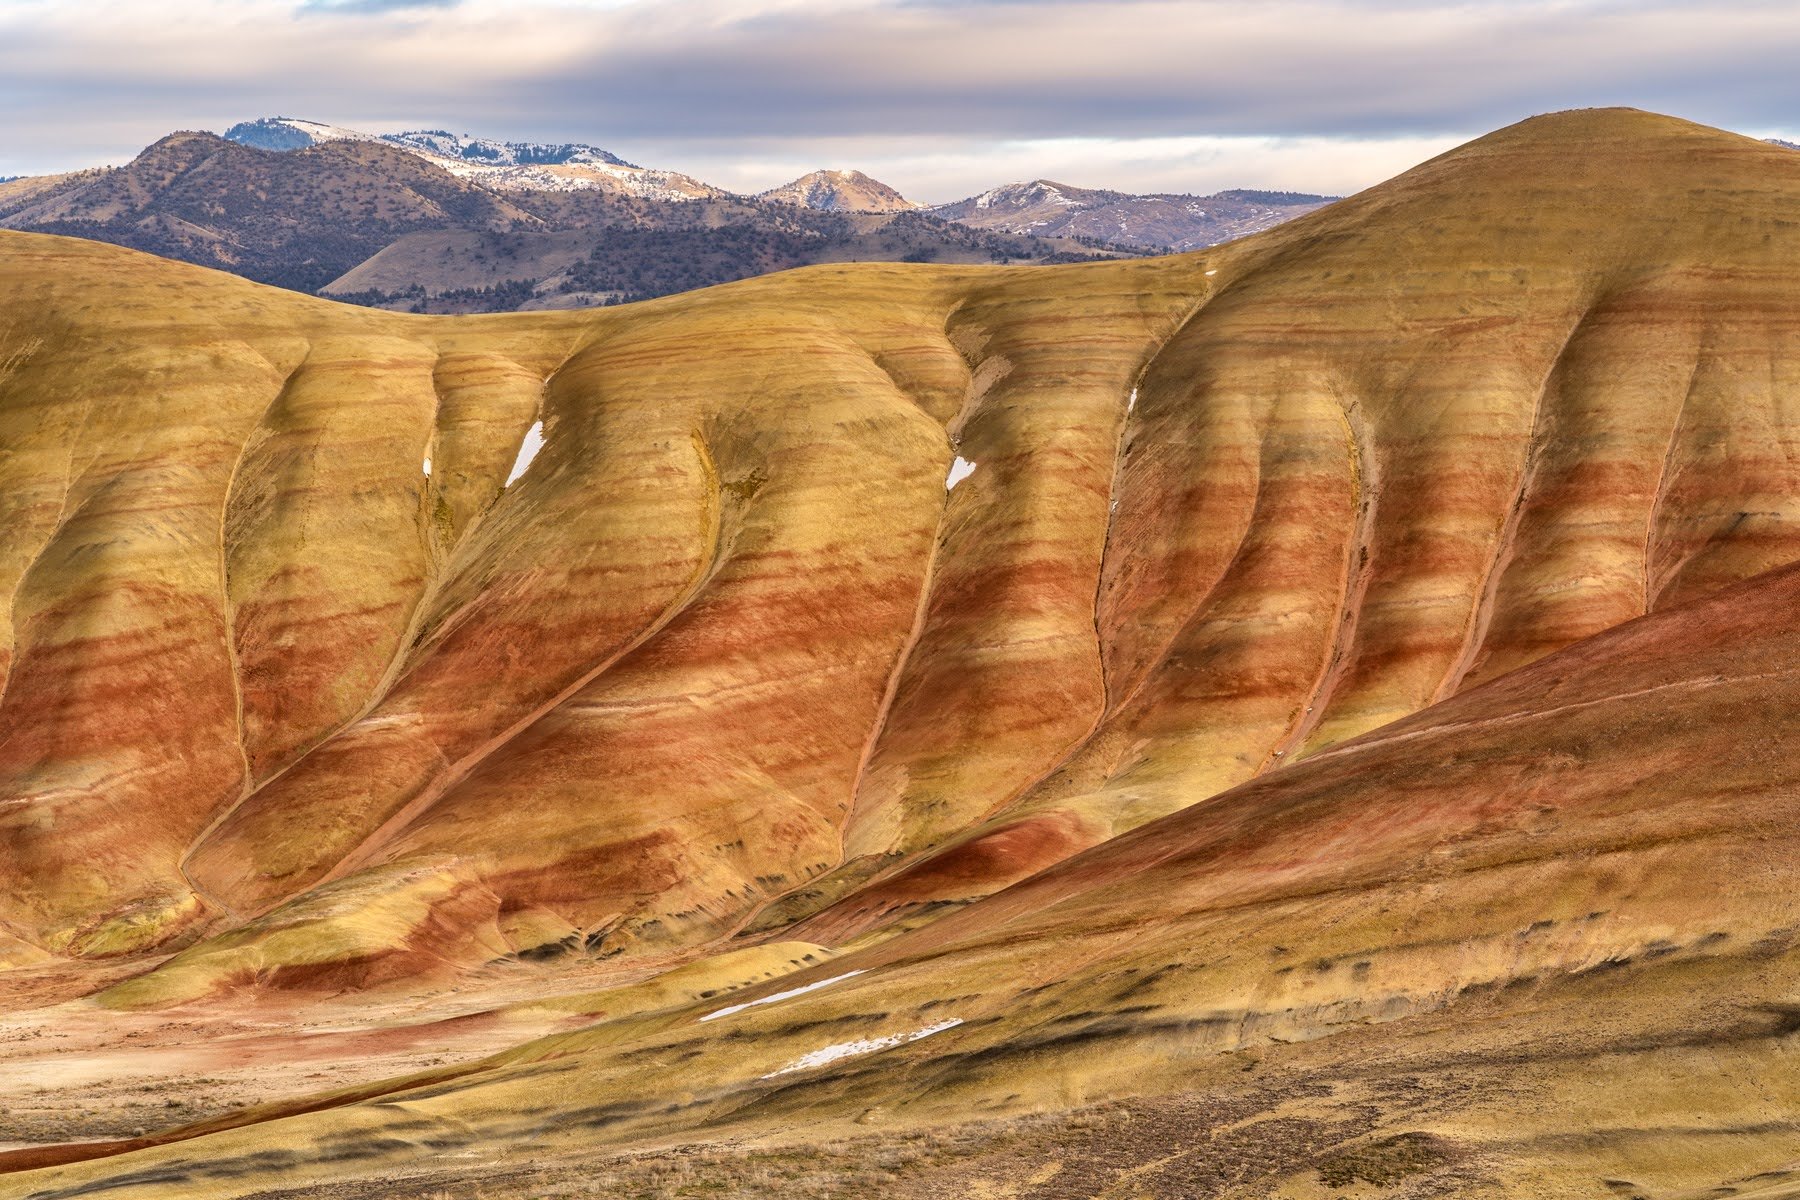 John Day Fossil Beds Painted Hills Unit in Oregon during sunset.